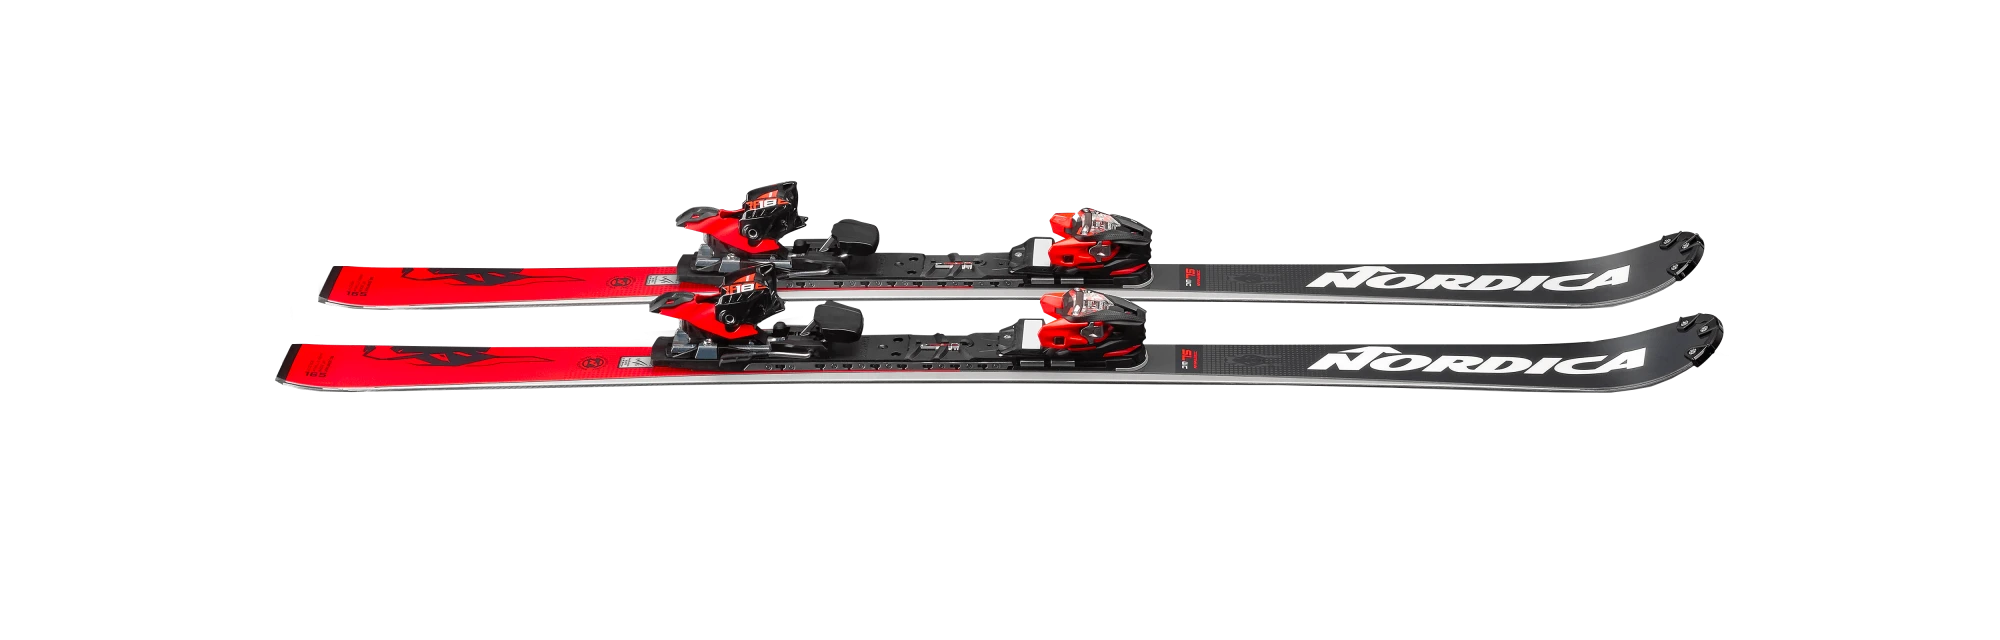 DOBERMANN SL WC PLATE Nordica - Skis and Boots – Official